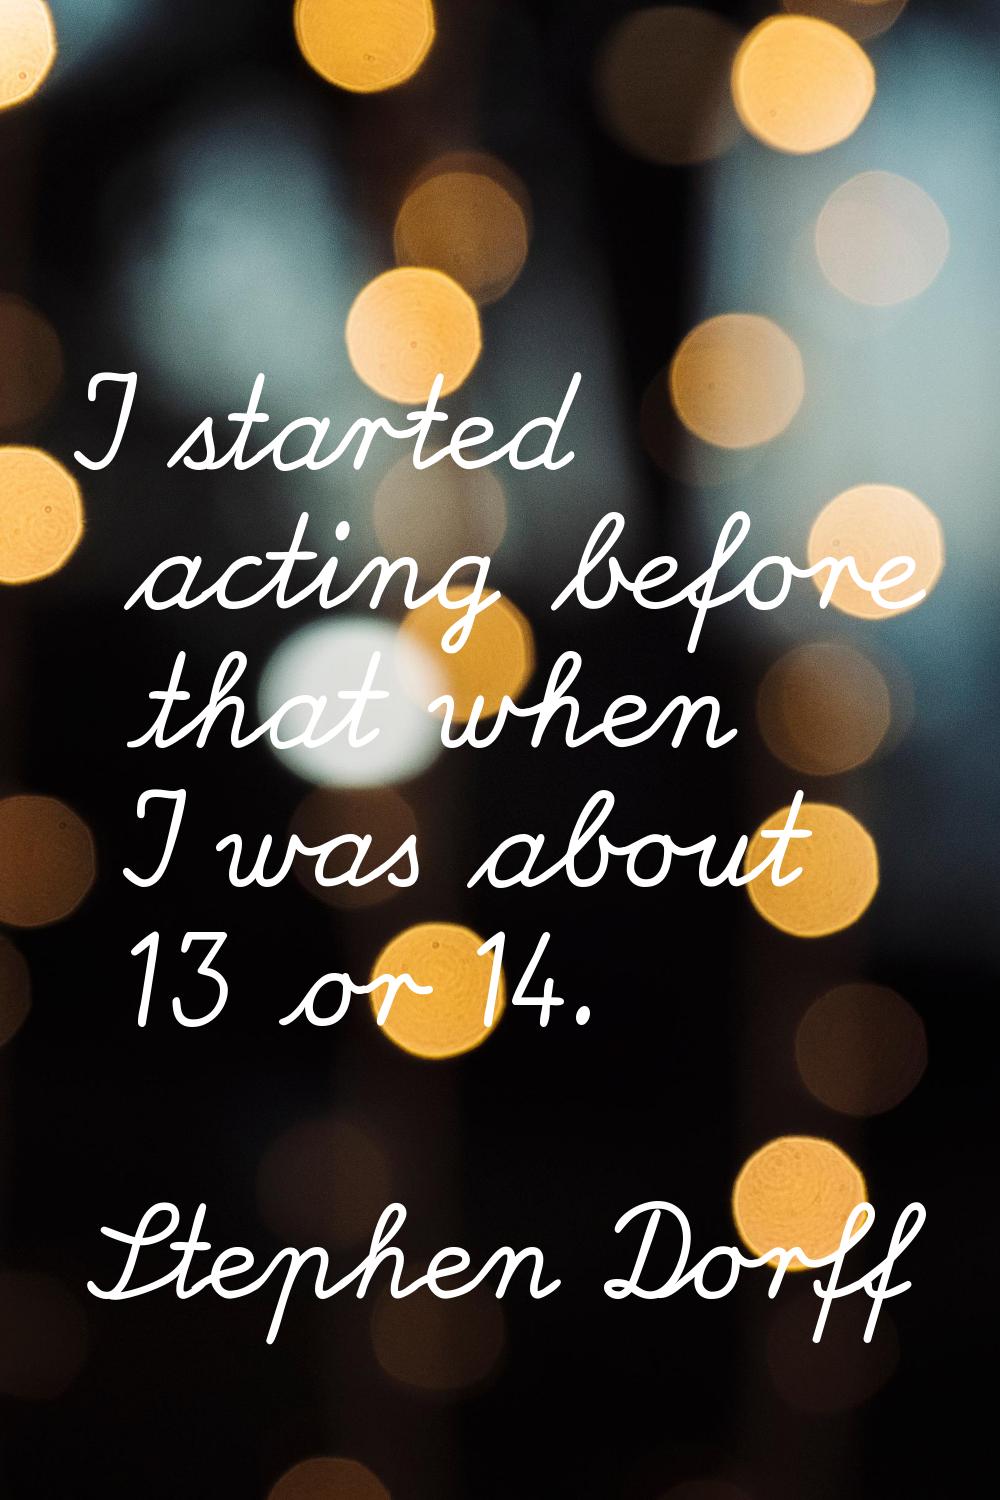 I started acting before that when I was about 13 or 14.